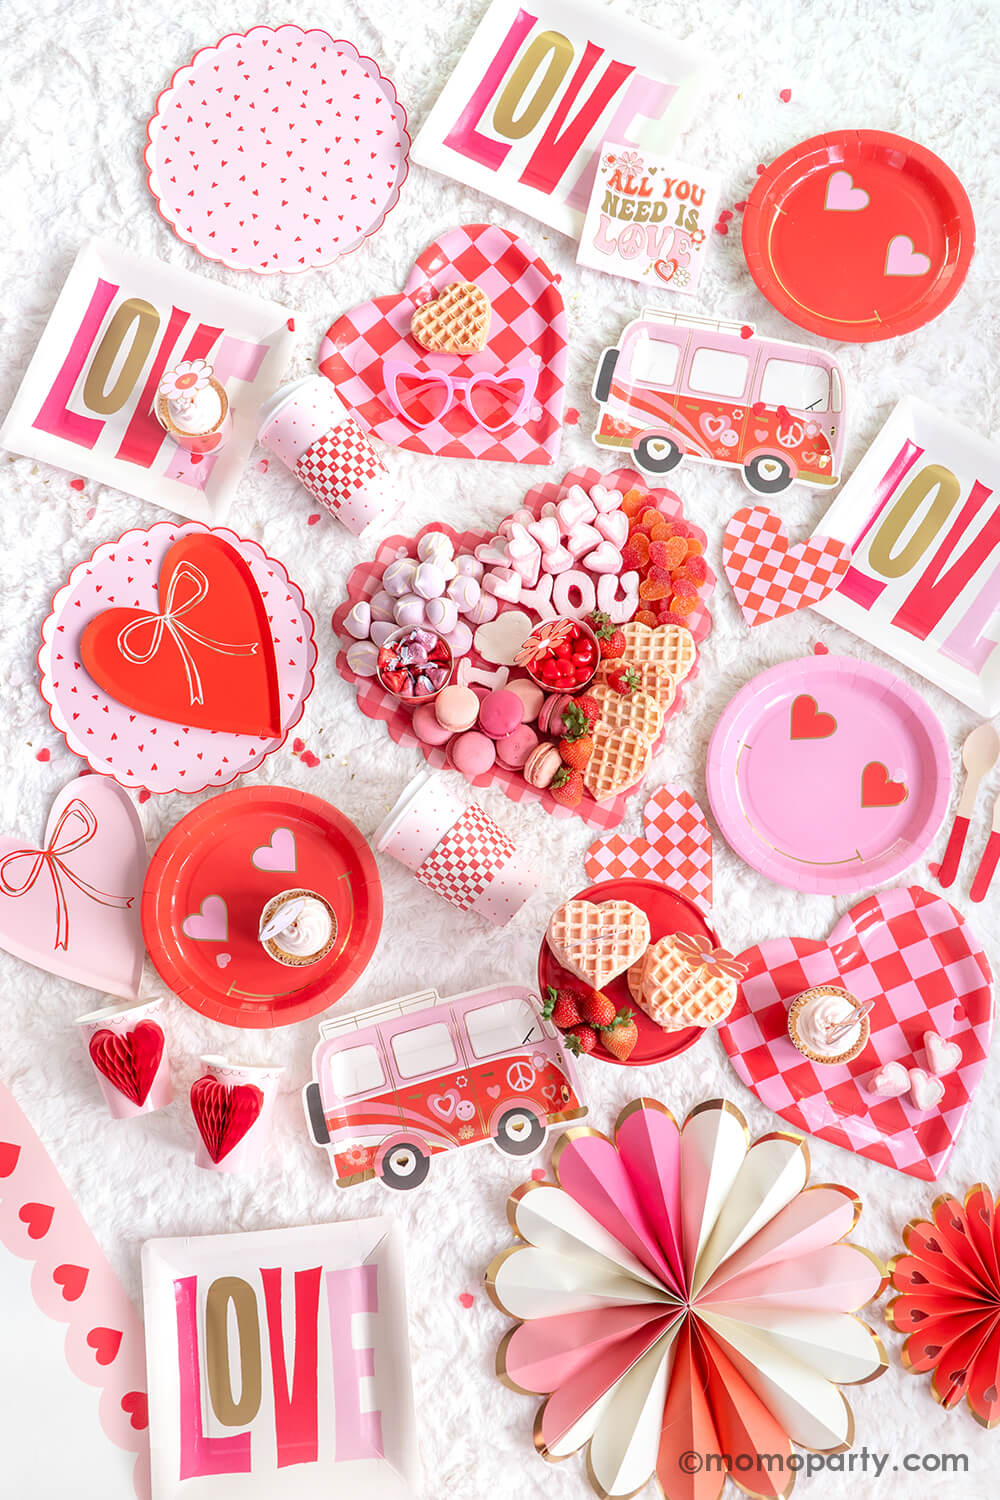 Top view displayed Momo Party's 2024 Valentine's Day party collection. Featuring  Heart Pattern Dinner Plates, Heart With Bow Plates, Honeycomb Heart Cups, Occasions by Shakira - Luv Bus Paper Plates, and All You Need is Love Napkins. Also, Checkered Heart-Shaped Paper Plates, Square Love Paper Plates, Heart Eyes Paper Plates, Red Checks To-Go Cup Set, and Pink Heart Border Paper Table Runner. Not to forget the Checkered Heart-Shaped Tray adorned with sweet treats, for a festive Valentine's celebration